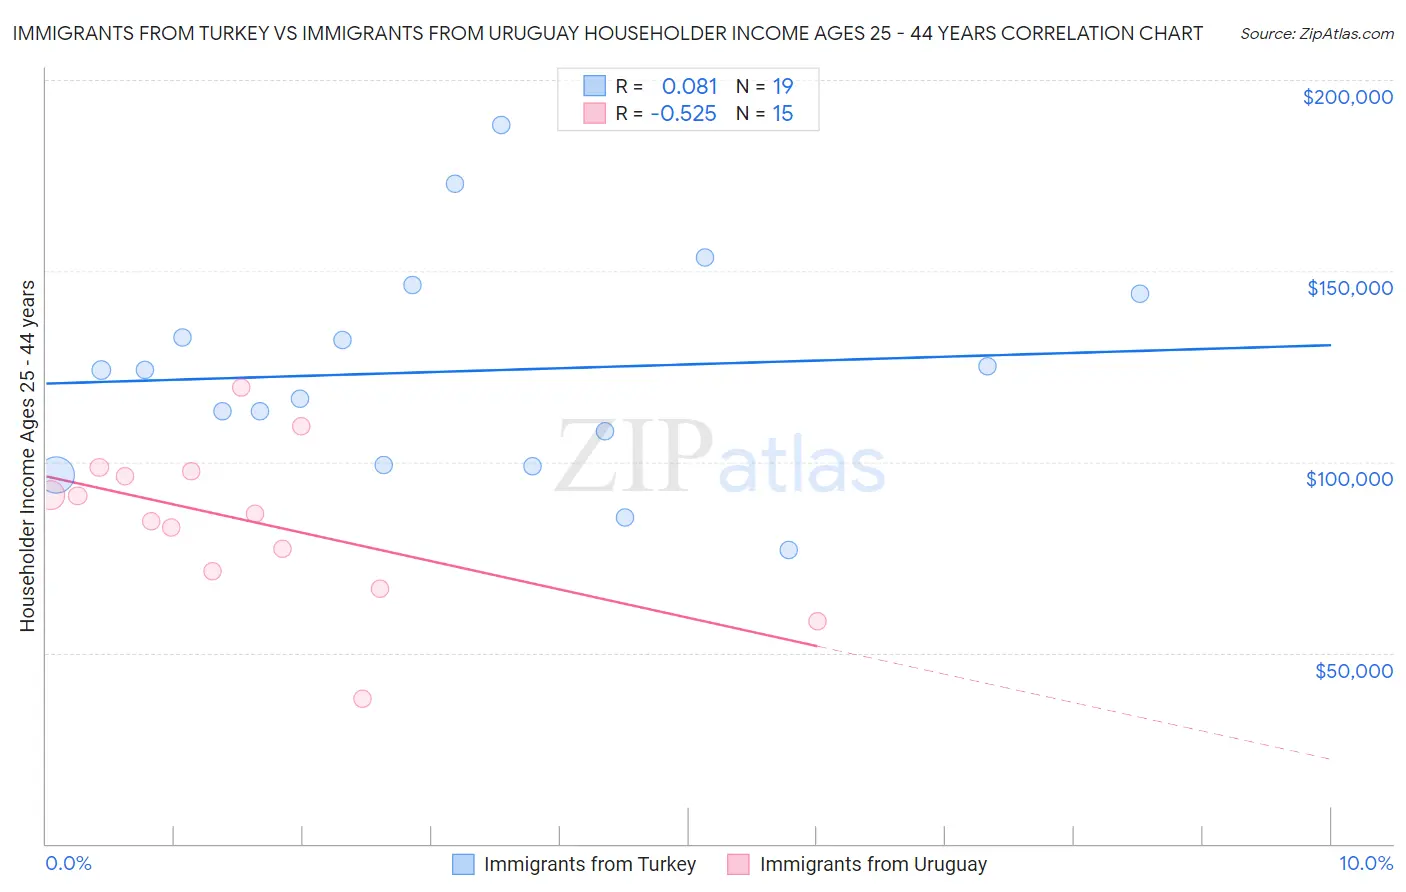 Immigrants from Turkey vs Immigrants from Uruguay Householder Income Ages 25 - 44 years